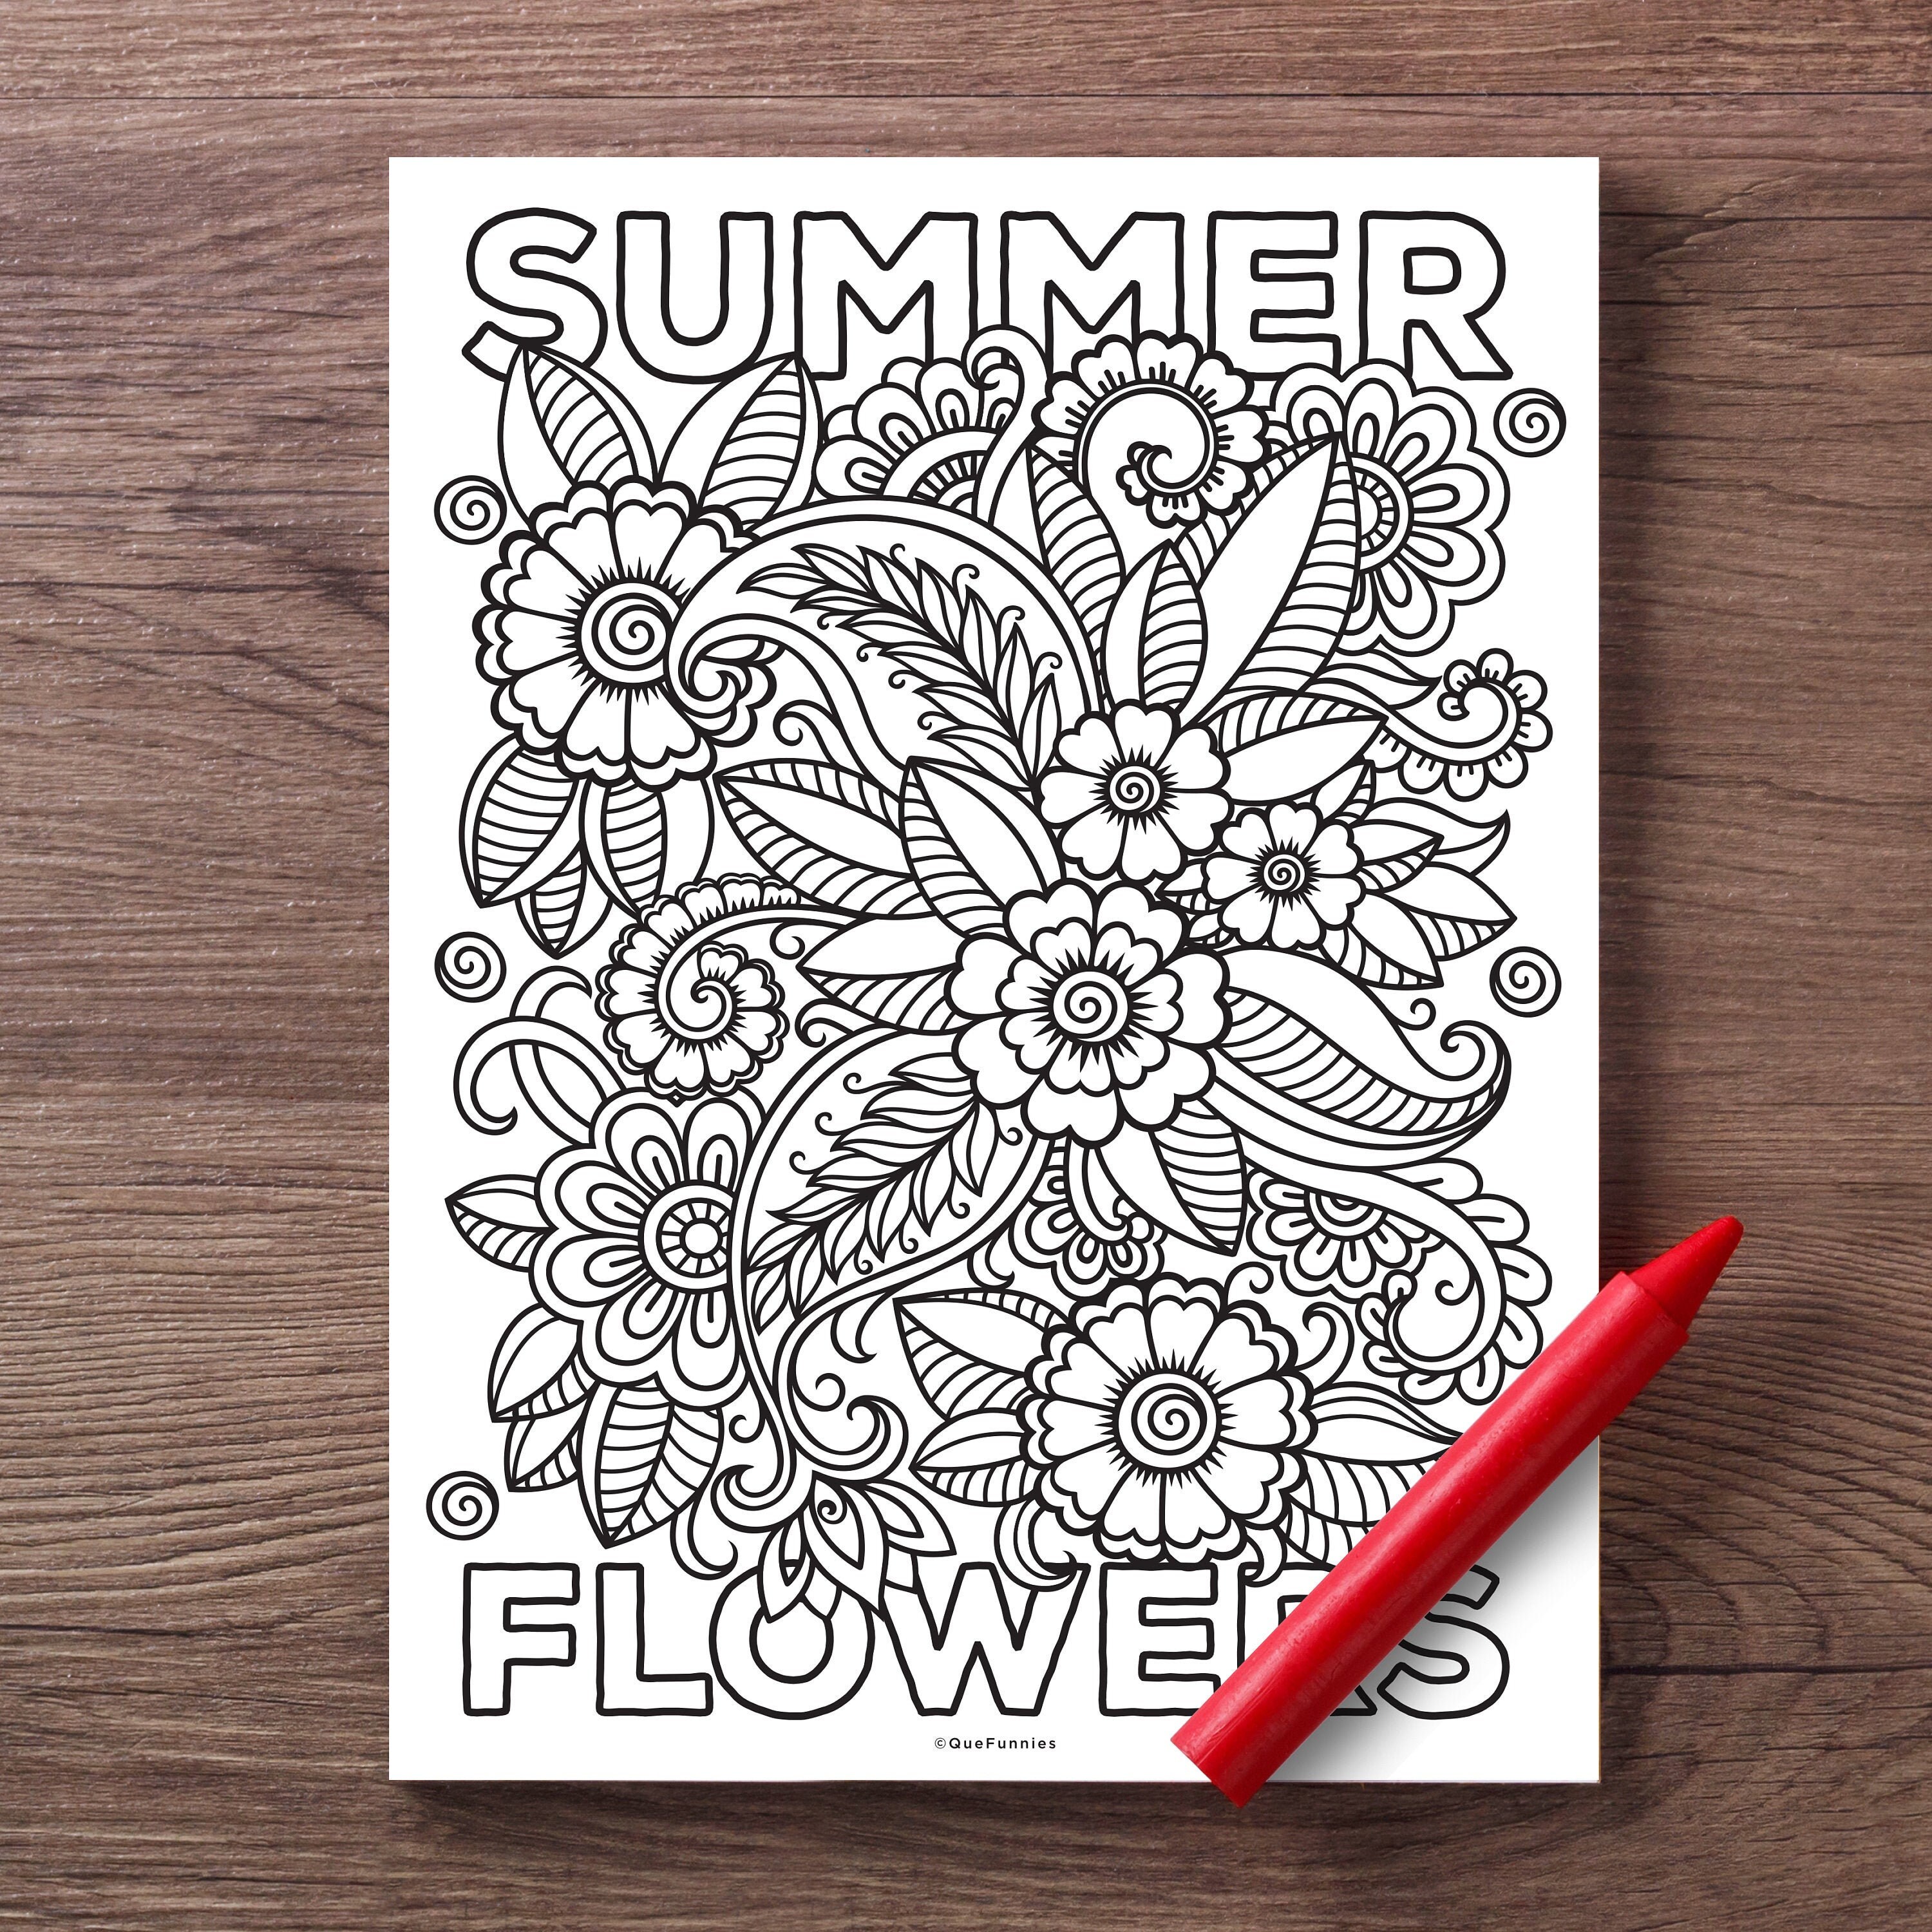 Summer flowers coloring page insta digital download kids coloring sheets printable coloring for kids